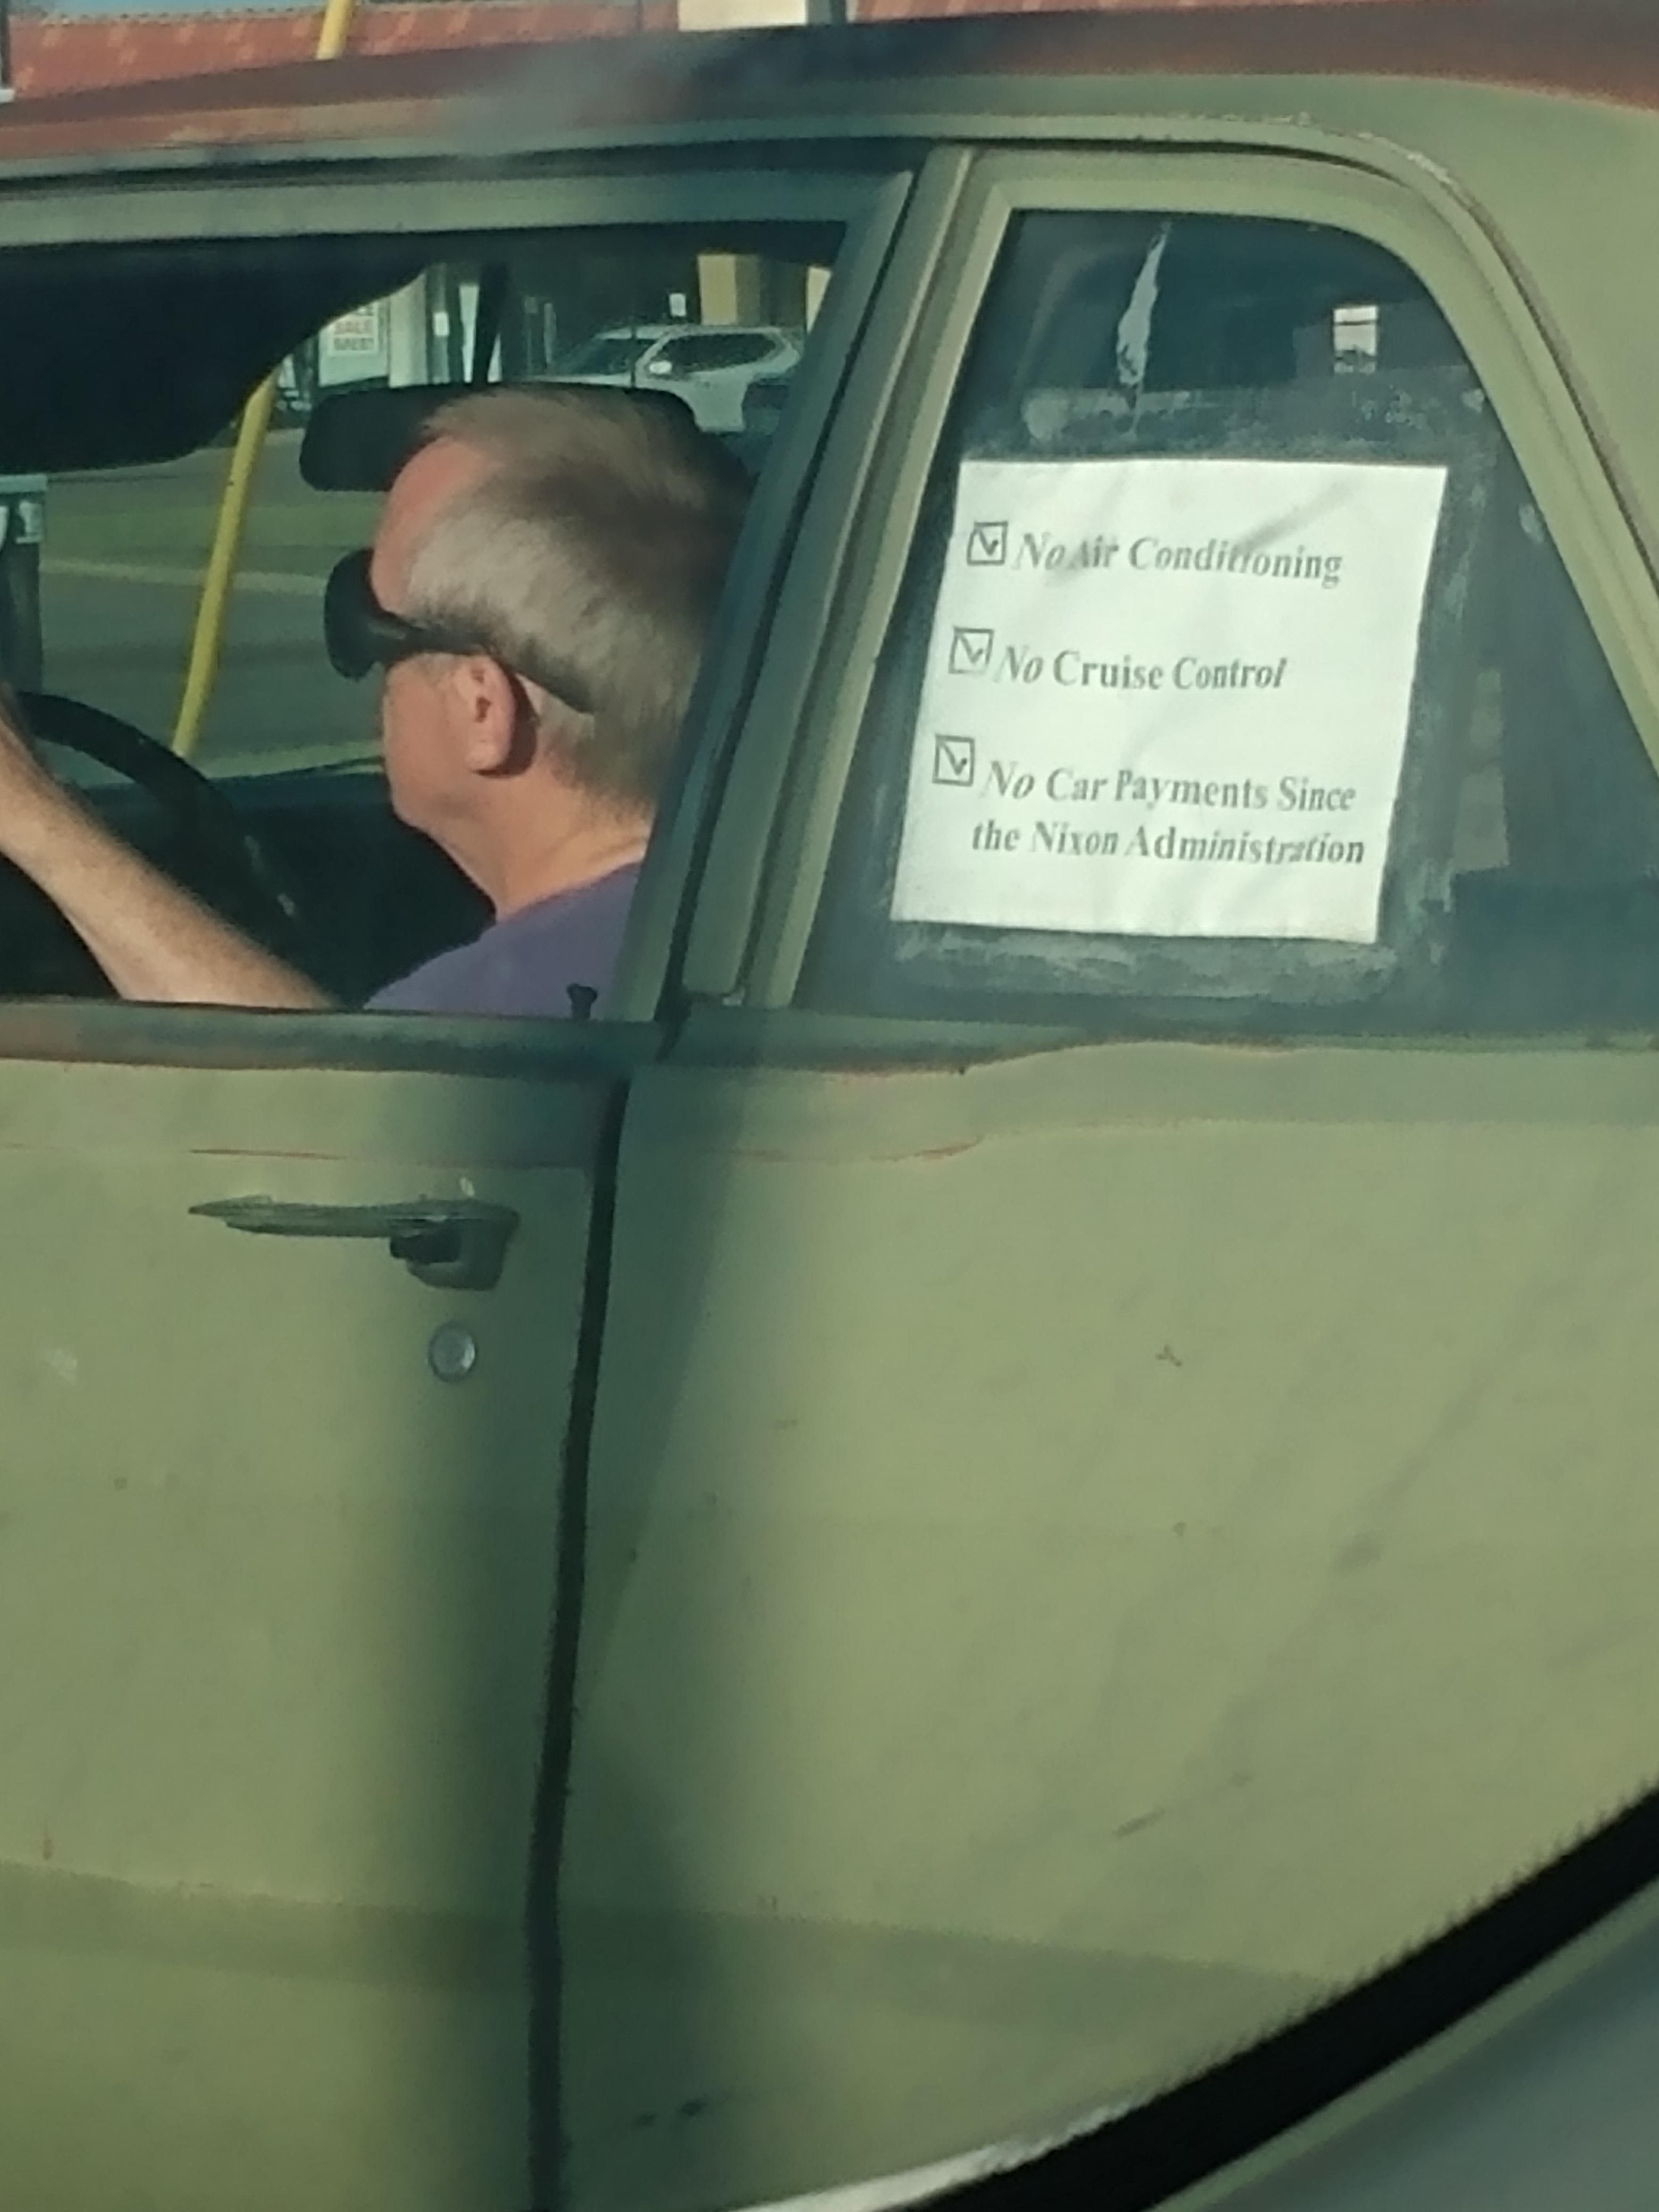 Spotted next to me at a red light.